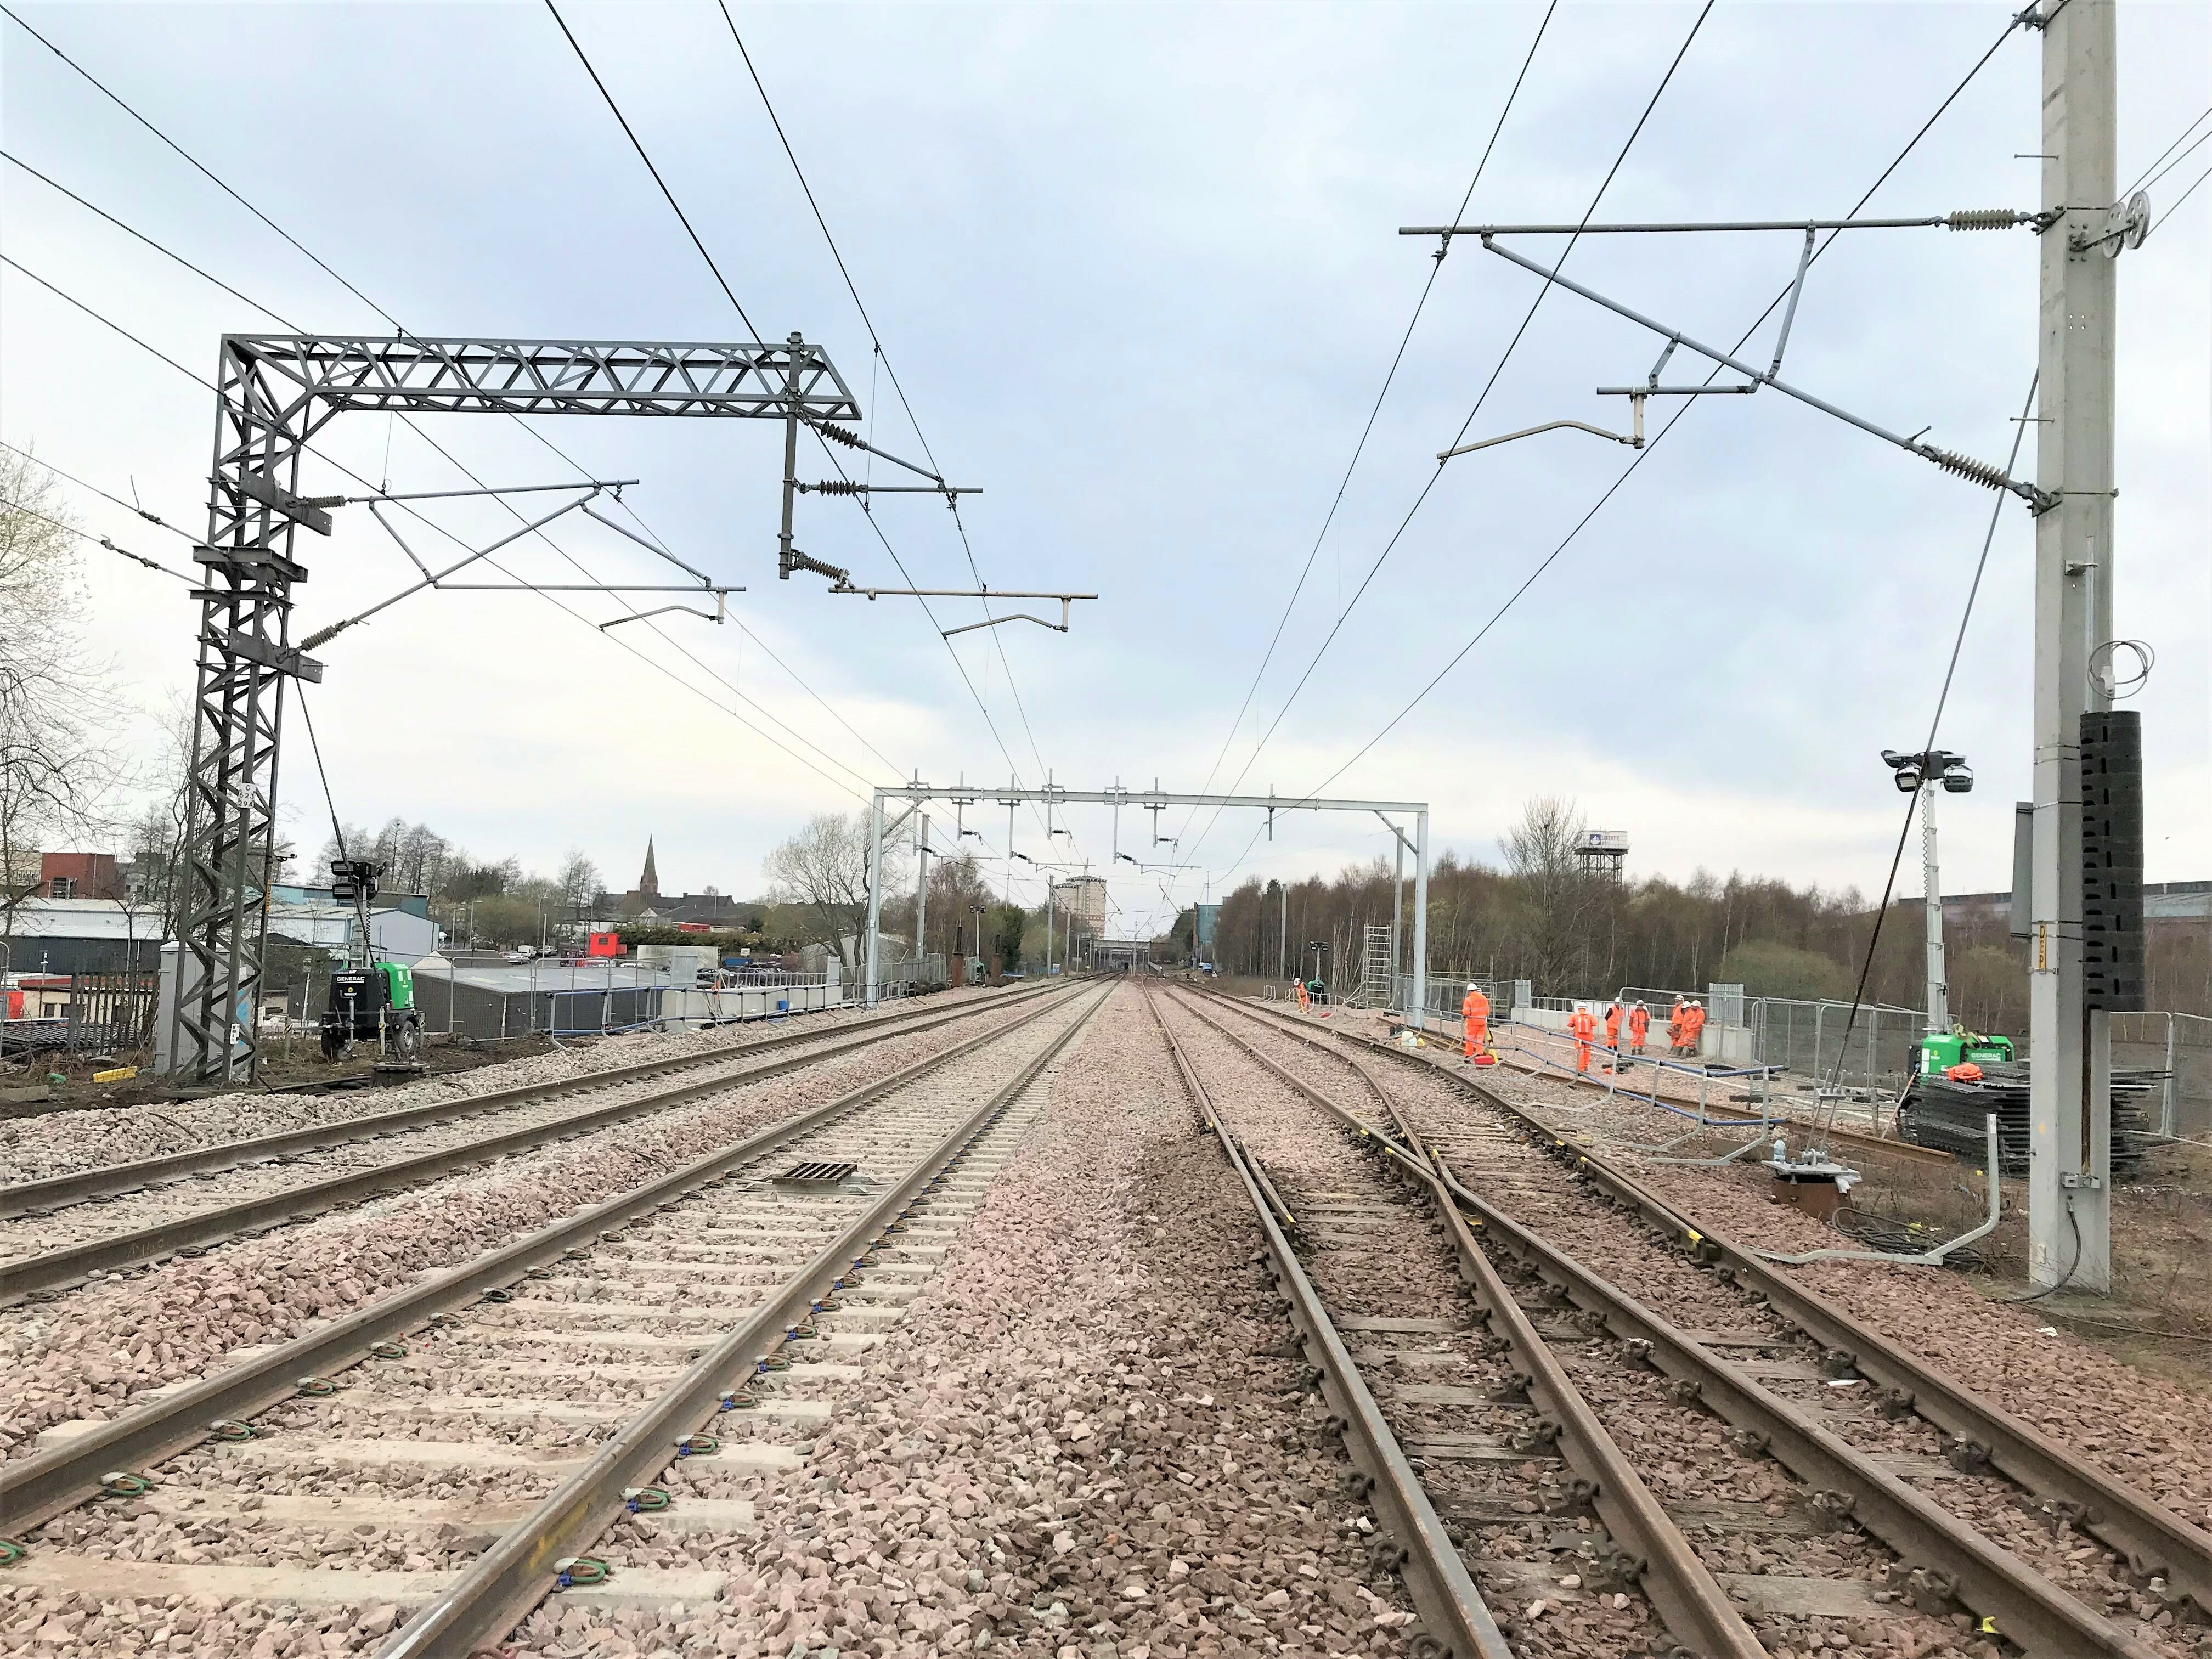 Non project work during Carstairs junction closure